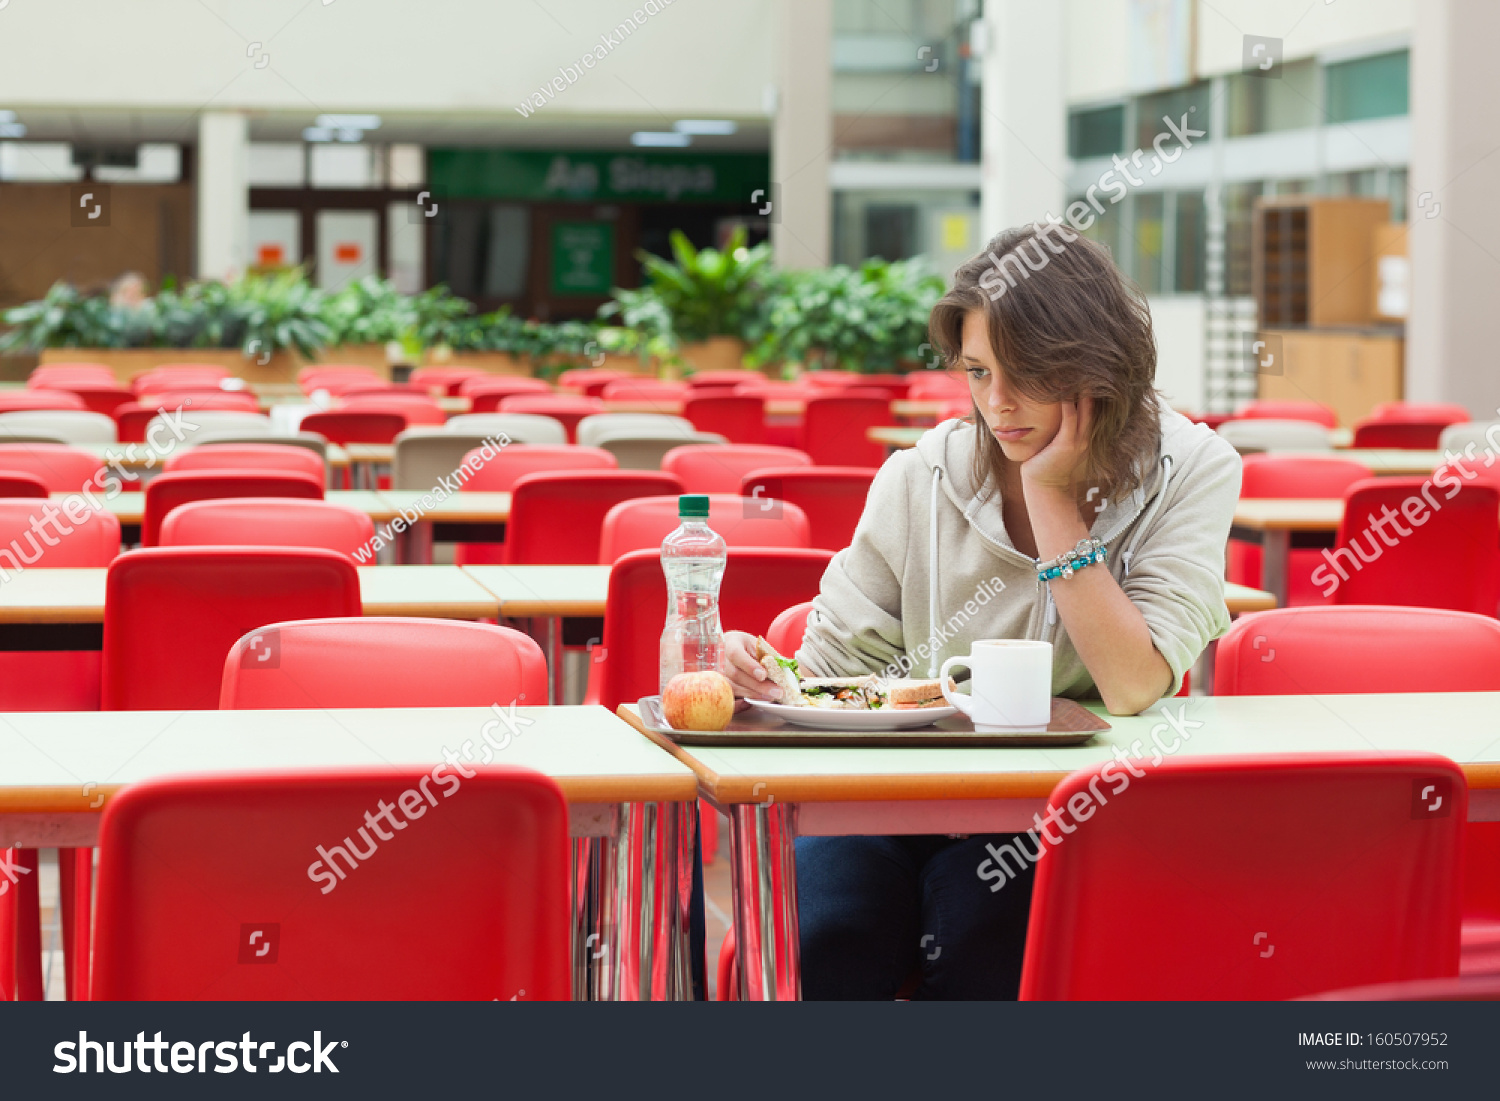 Alone and sad female student sitting in the cafeteria with food tray #160507952